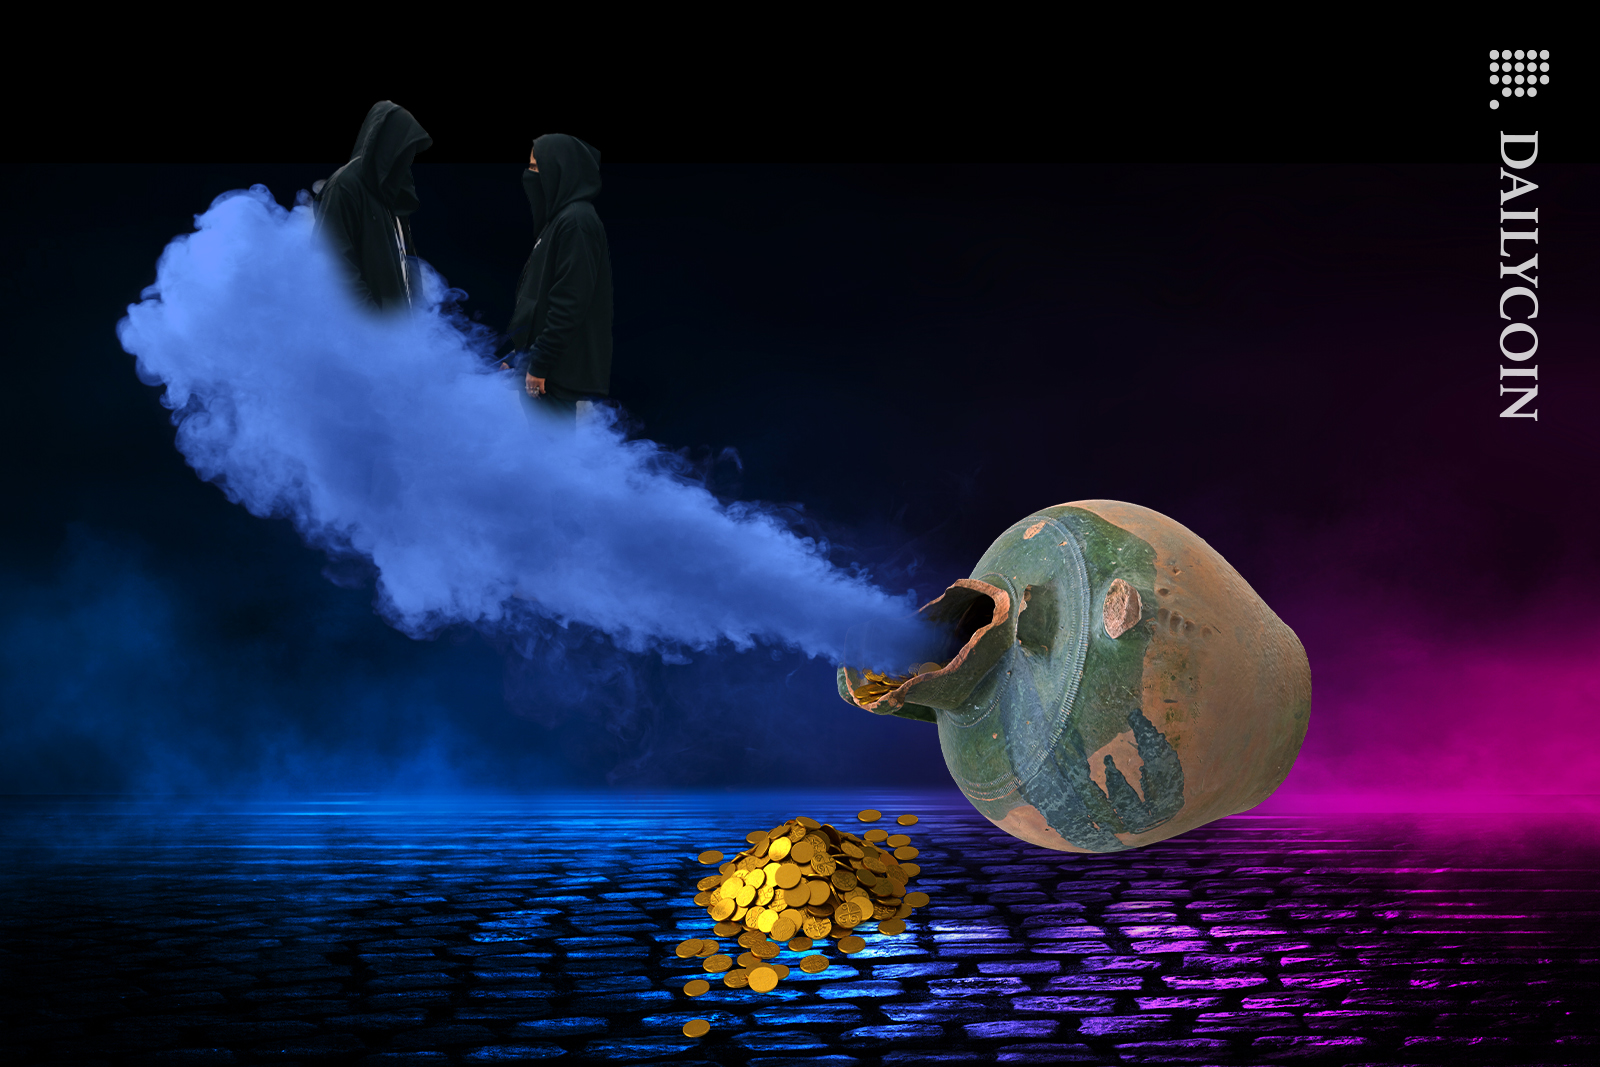 Coins and smoke coming out of a broken secret treasure pot, on a dark street, with a criminal deal being made.